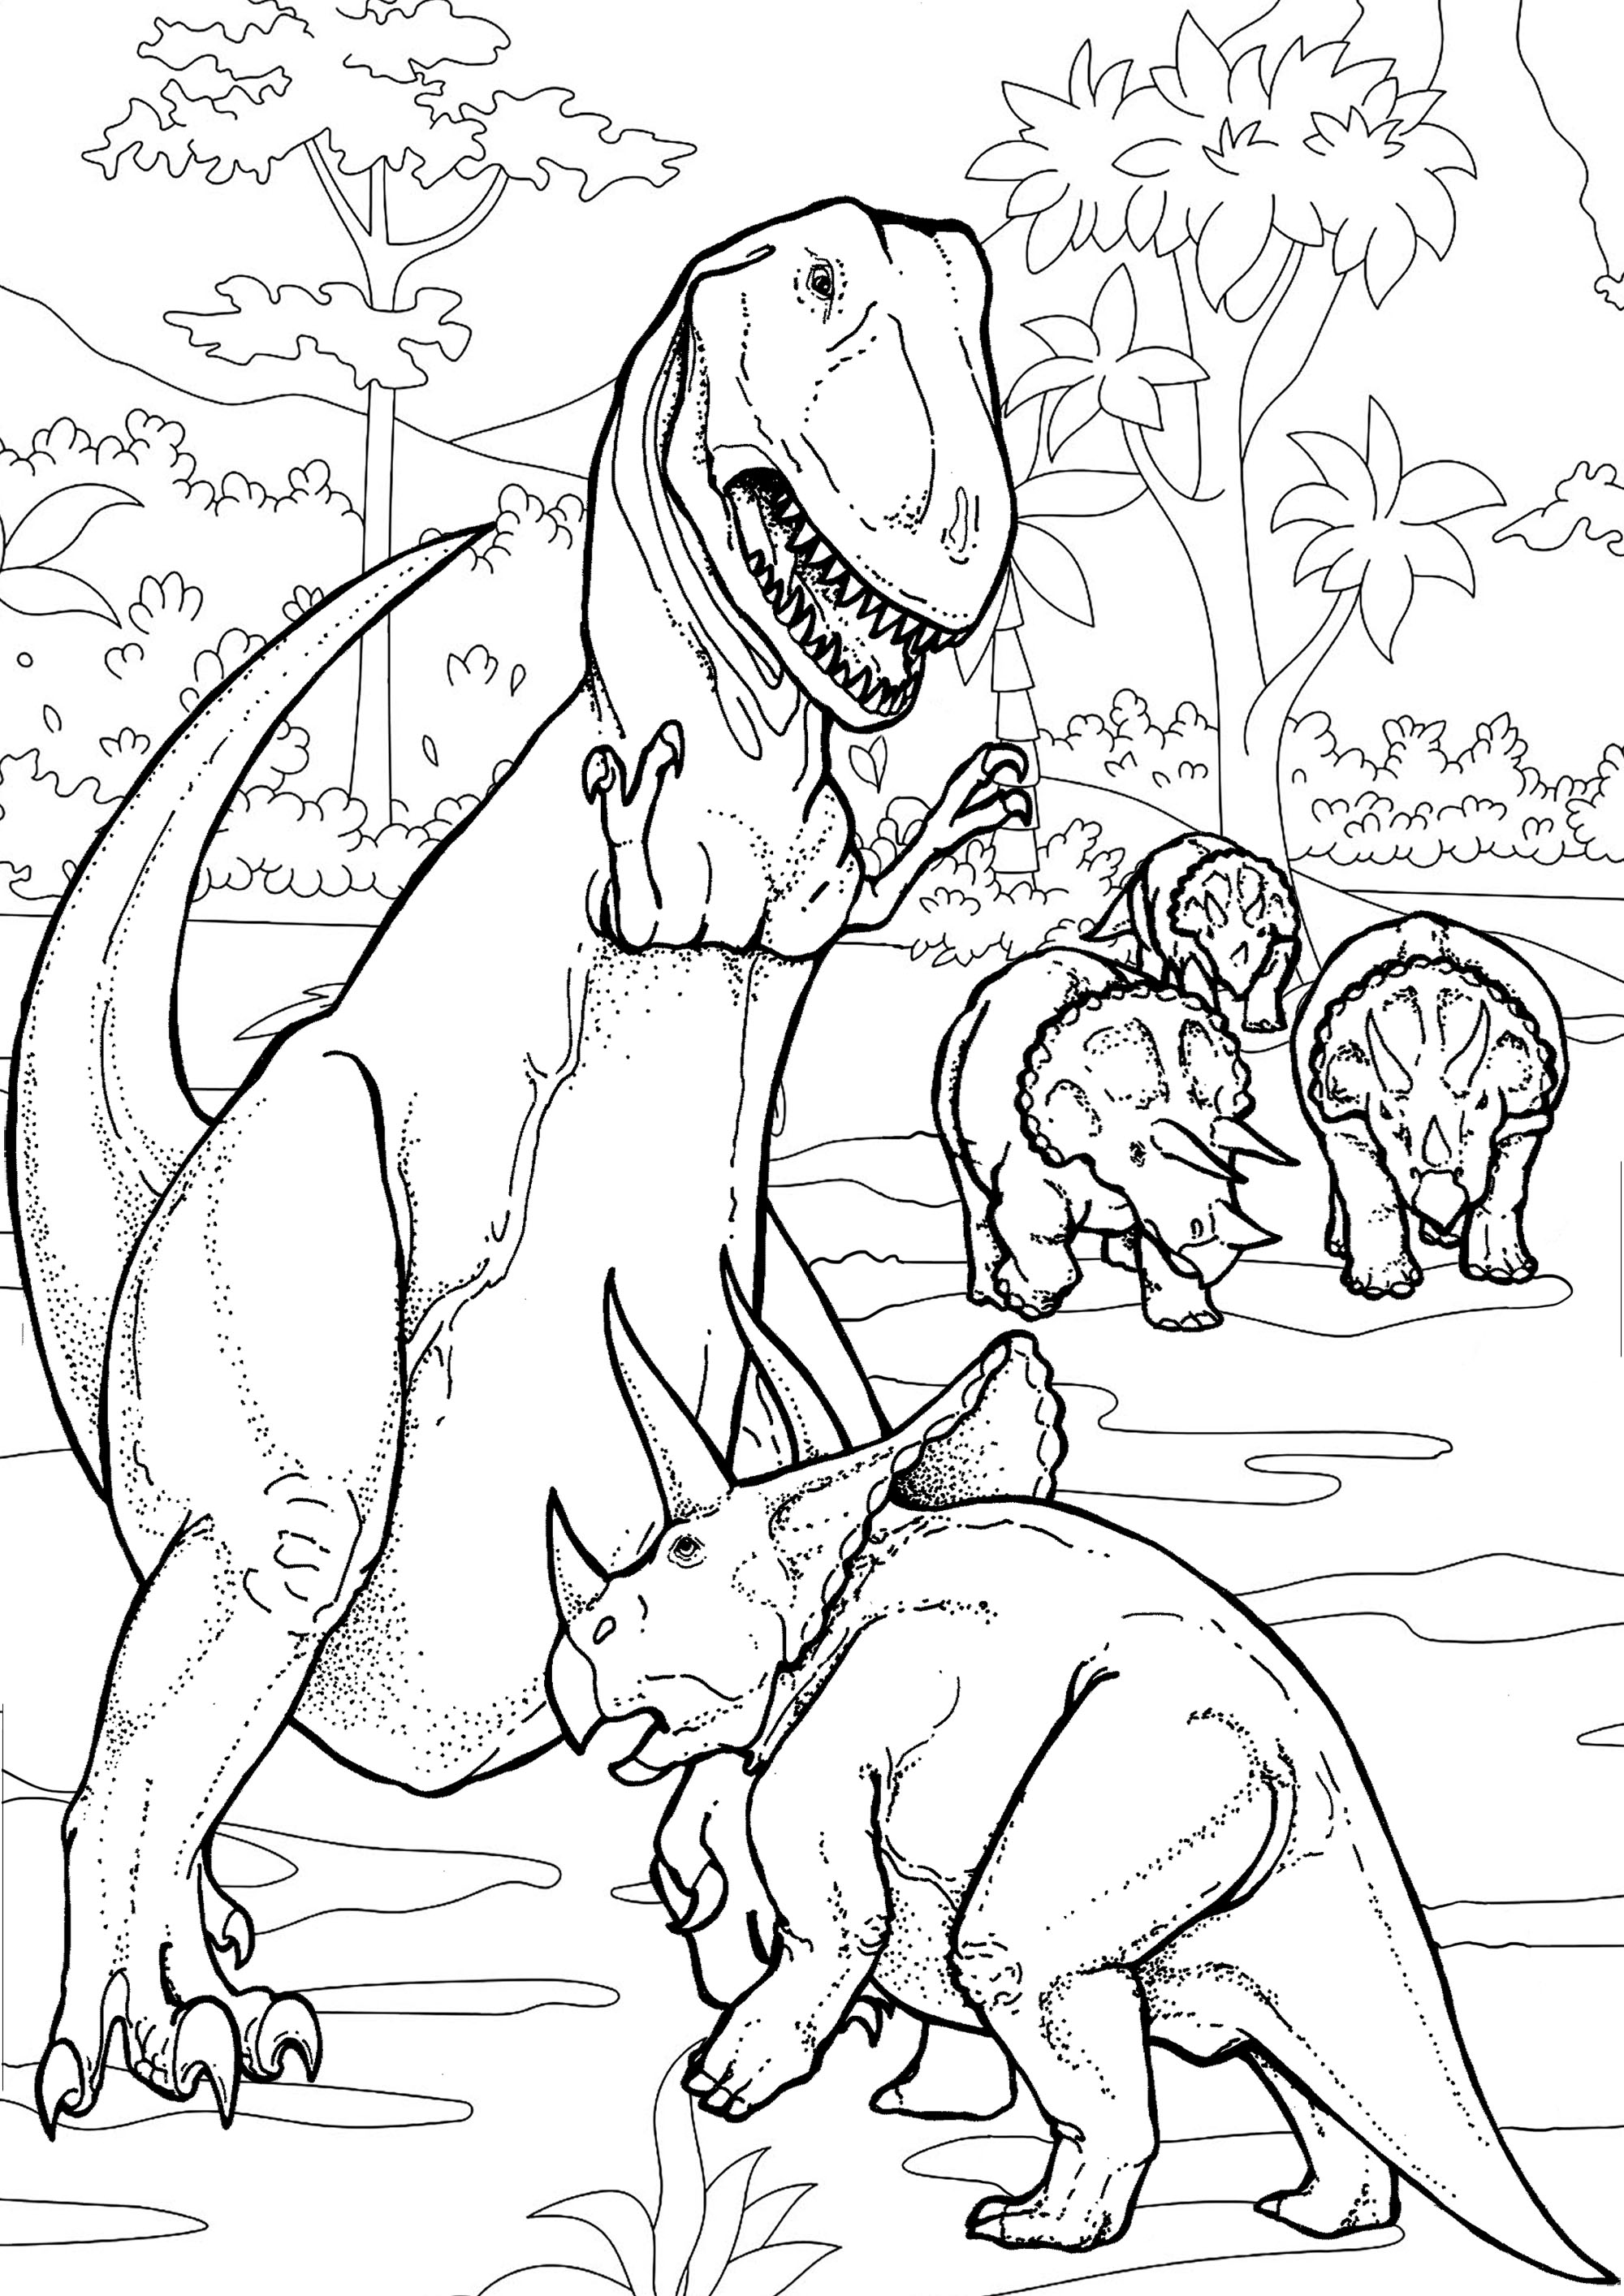 Dinosaur fight between a Tyrannosaurus and a Triceratops. In a land of lush vegetation and towering dinosaurs, here is an incredible battle between two dinosaurs.The T-Rex's strength was formidable, but the Triceratops's speed and agility proved to be formidable as well.Who will win this fight ?, Artist : Art. Isabelle